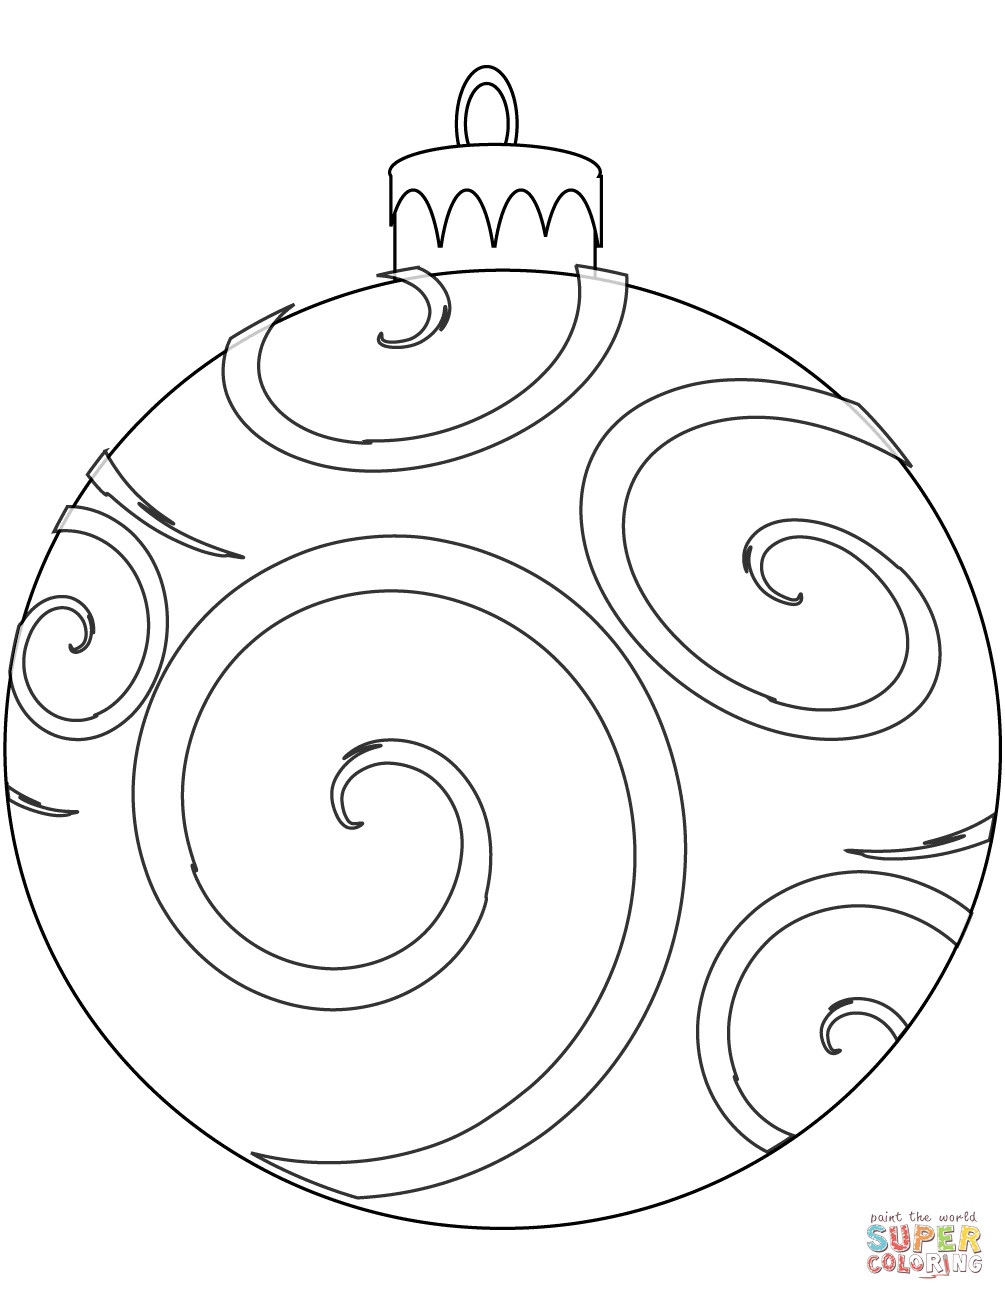 Christmas Ornaments Coloring Pages
 Holiday Ornament coloring page